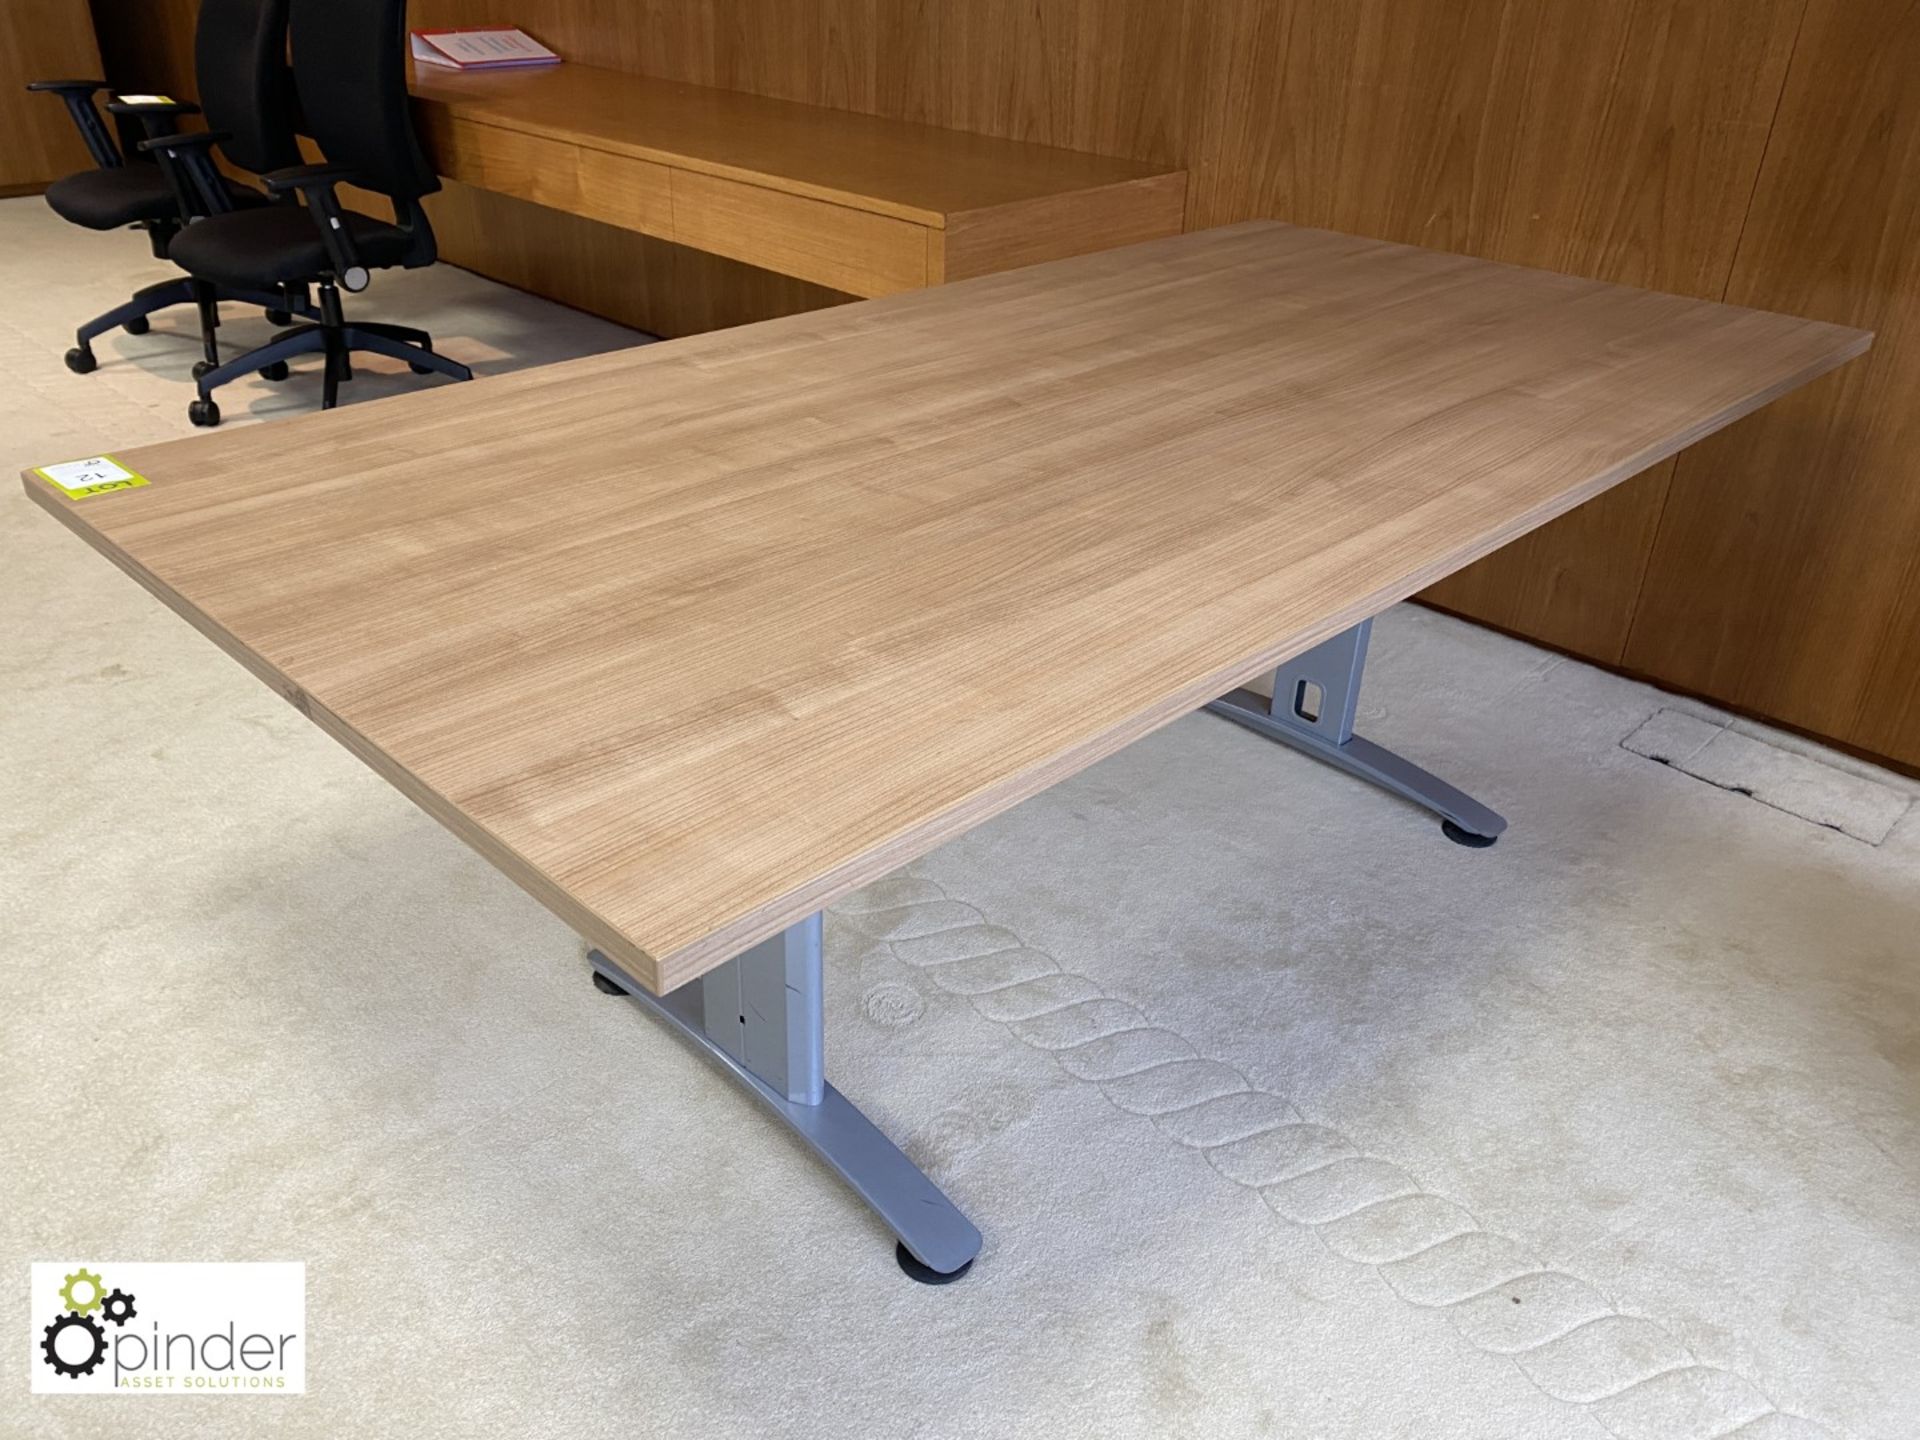 Limed oak effect office Table, 2000mm x 1000mm (located in Boardroom on 23rd Floor) - Image 2 of 2